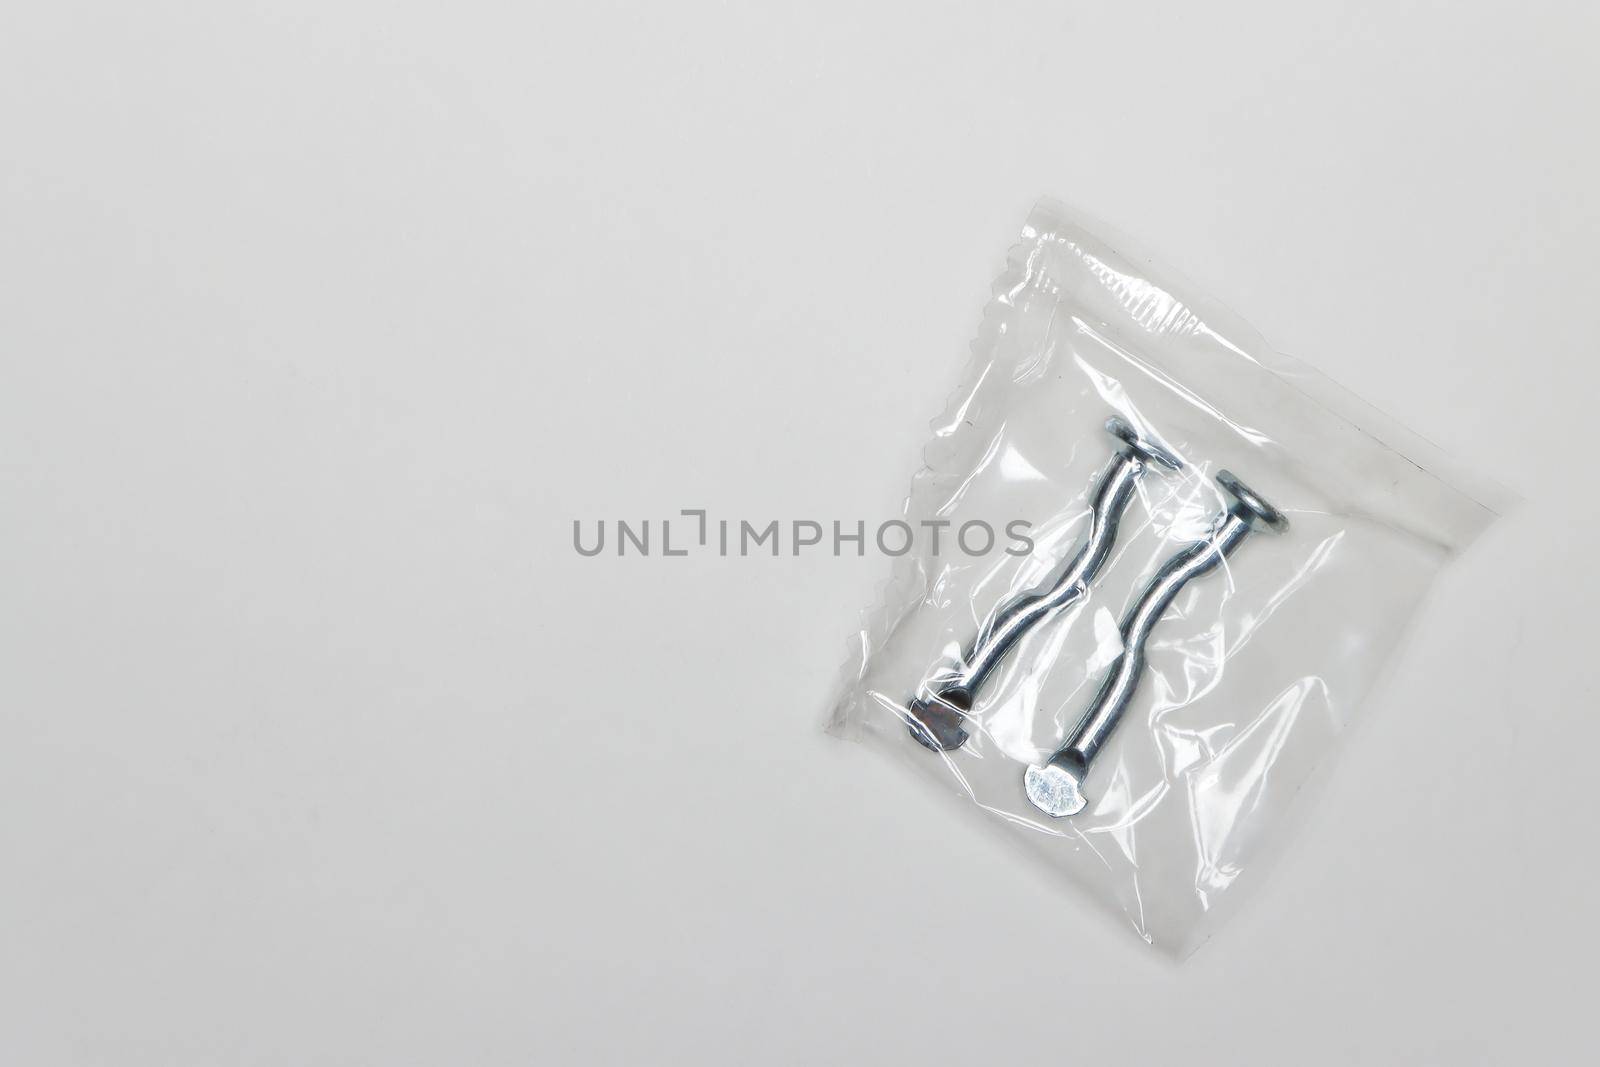 Two metal curved fingers per package, machine repair parts. A set of spare parts for servicing vehicle calipers. Details on white background, copy space available.